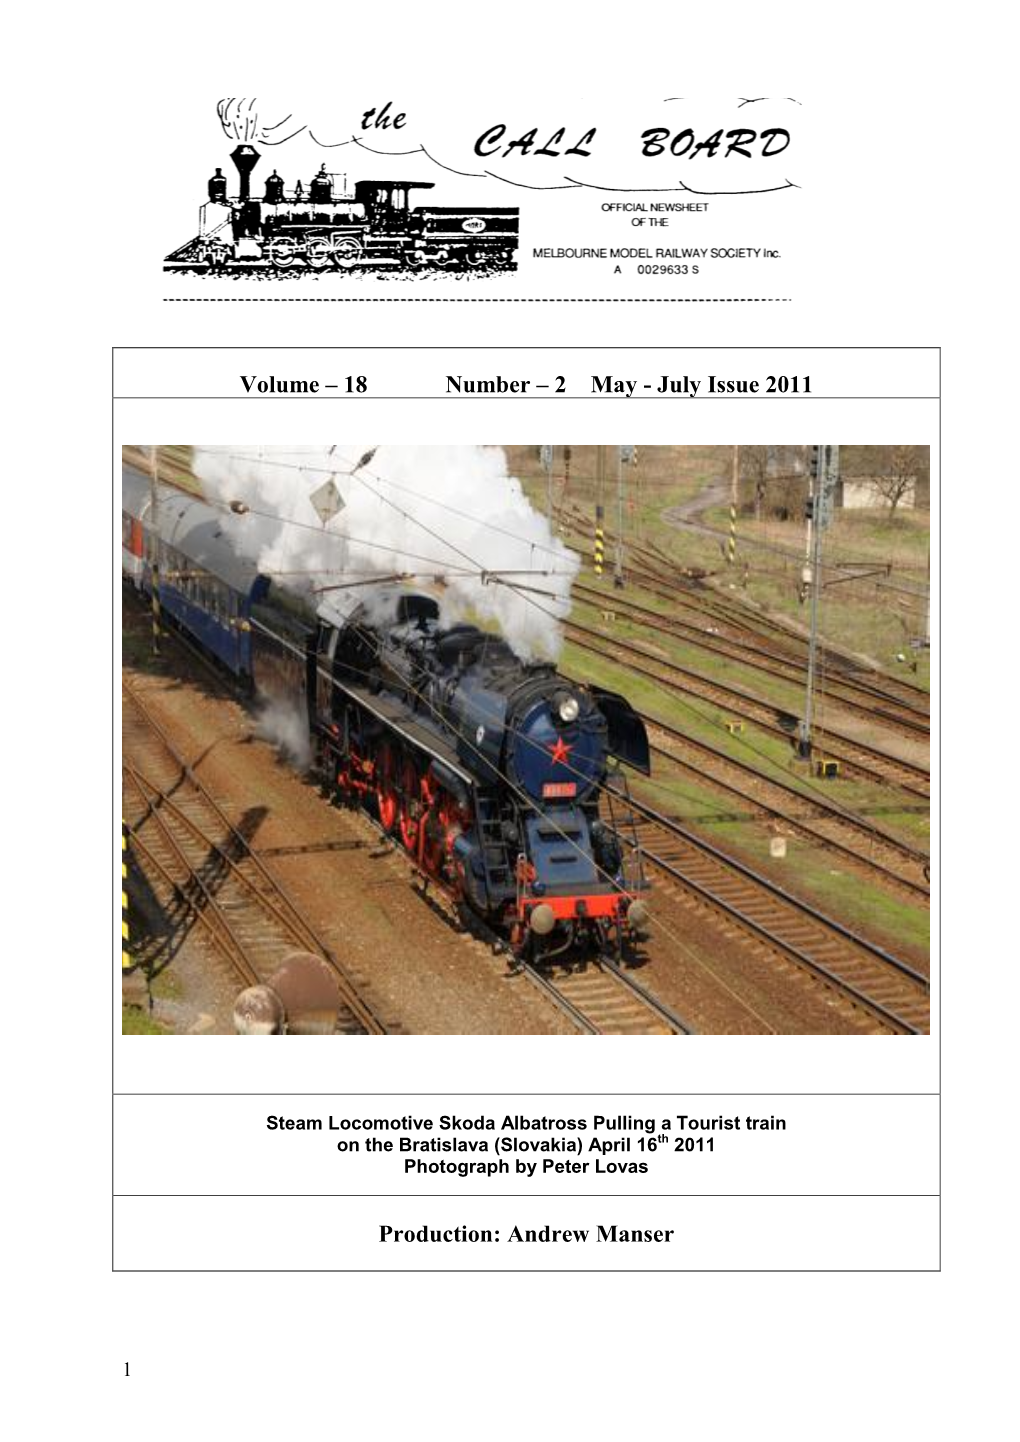 Volume – 18 Number – 2 May - July Issue 2011